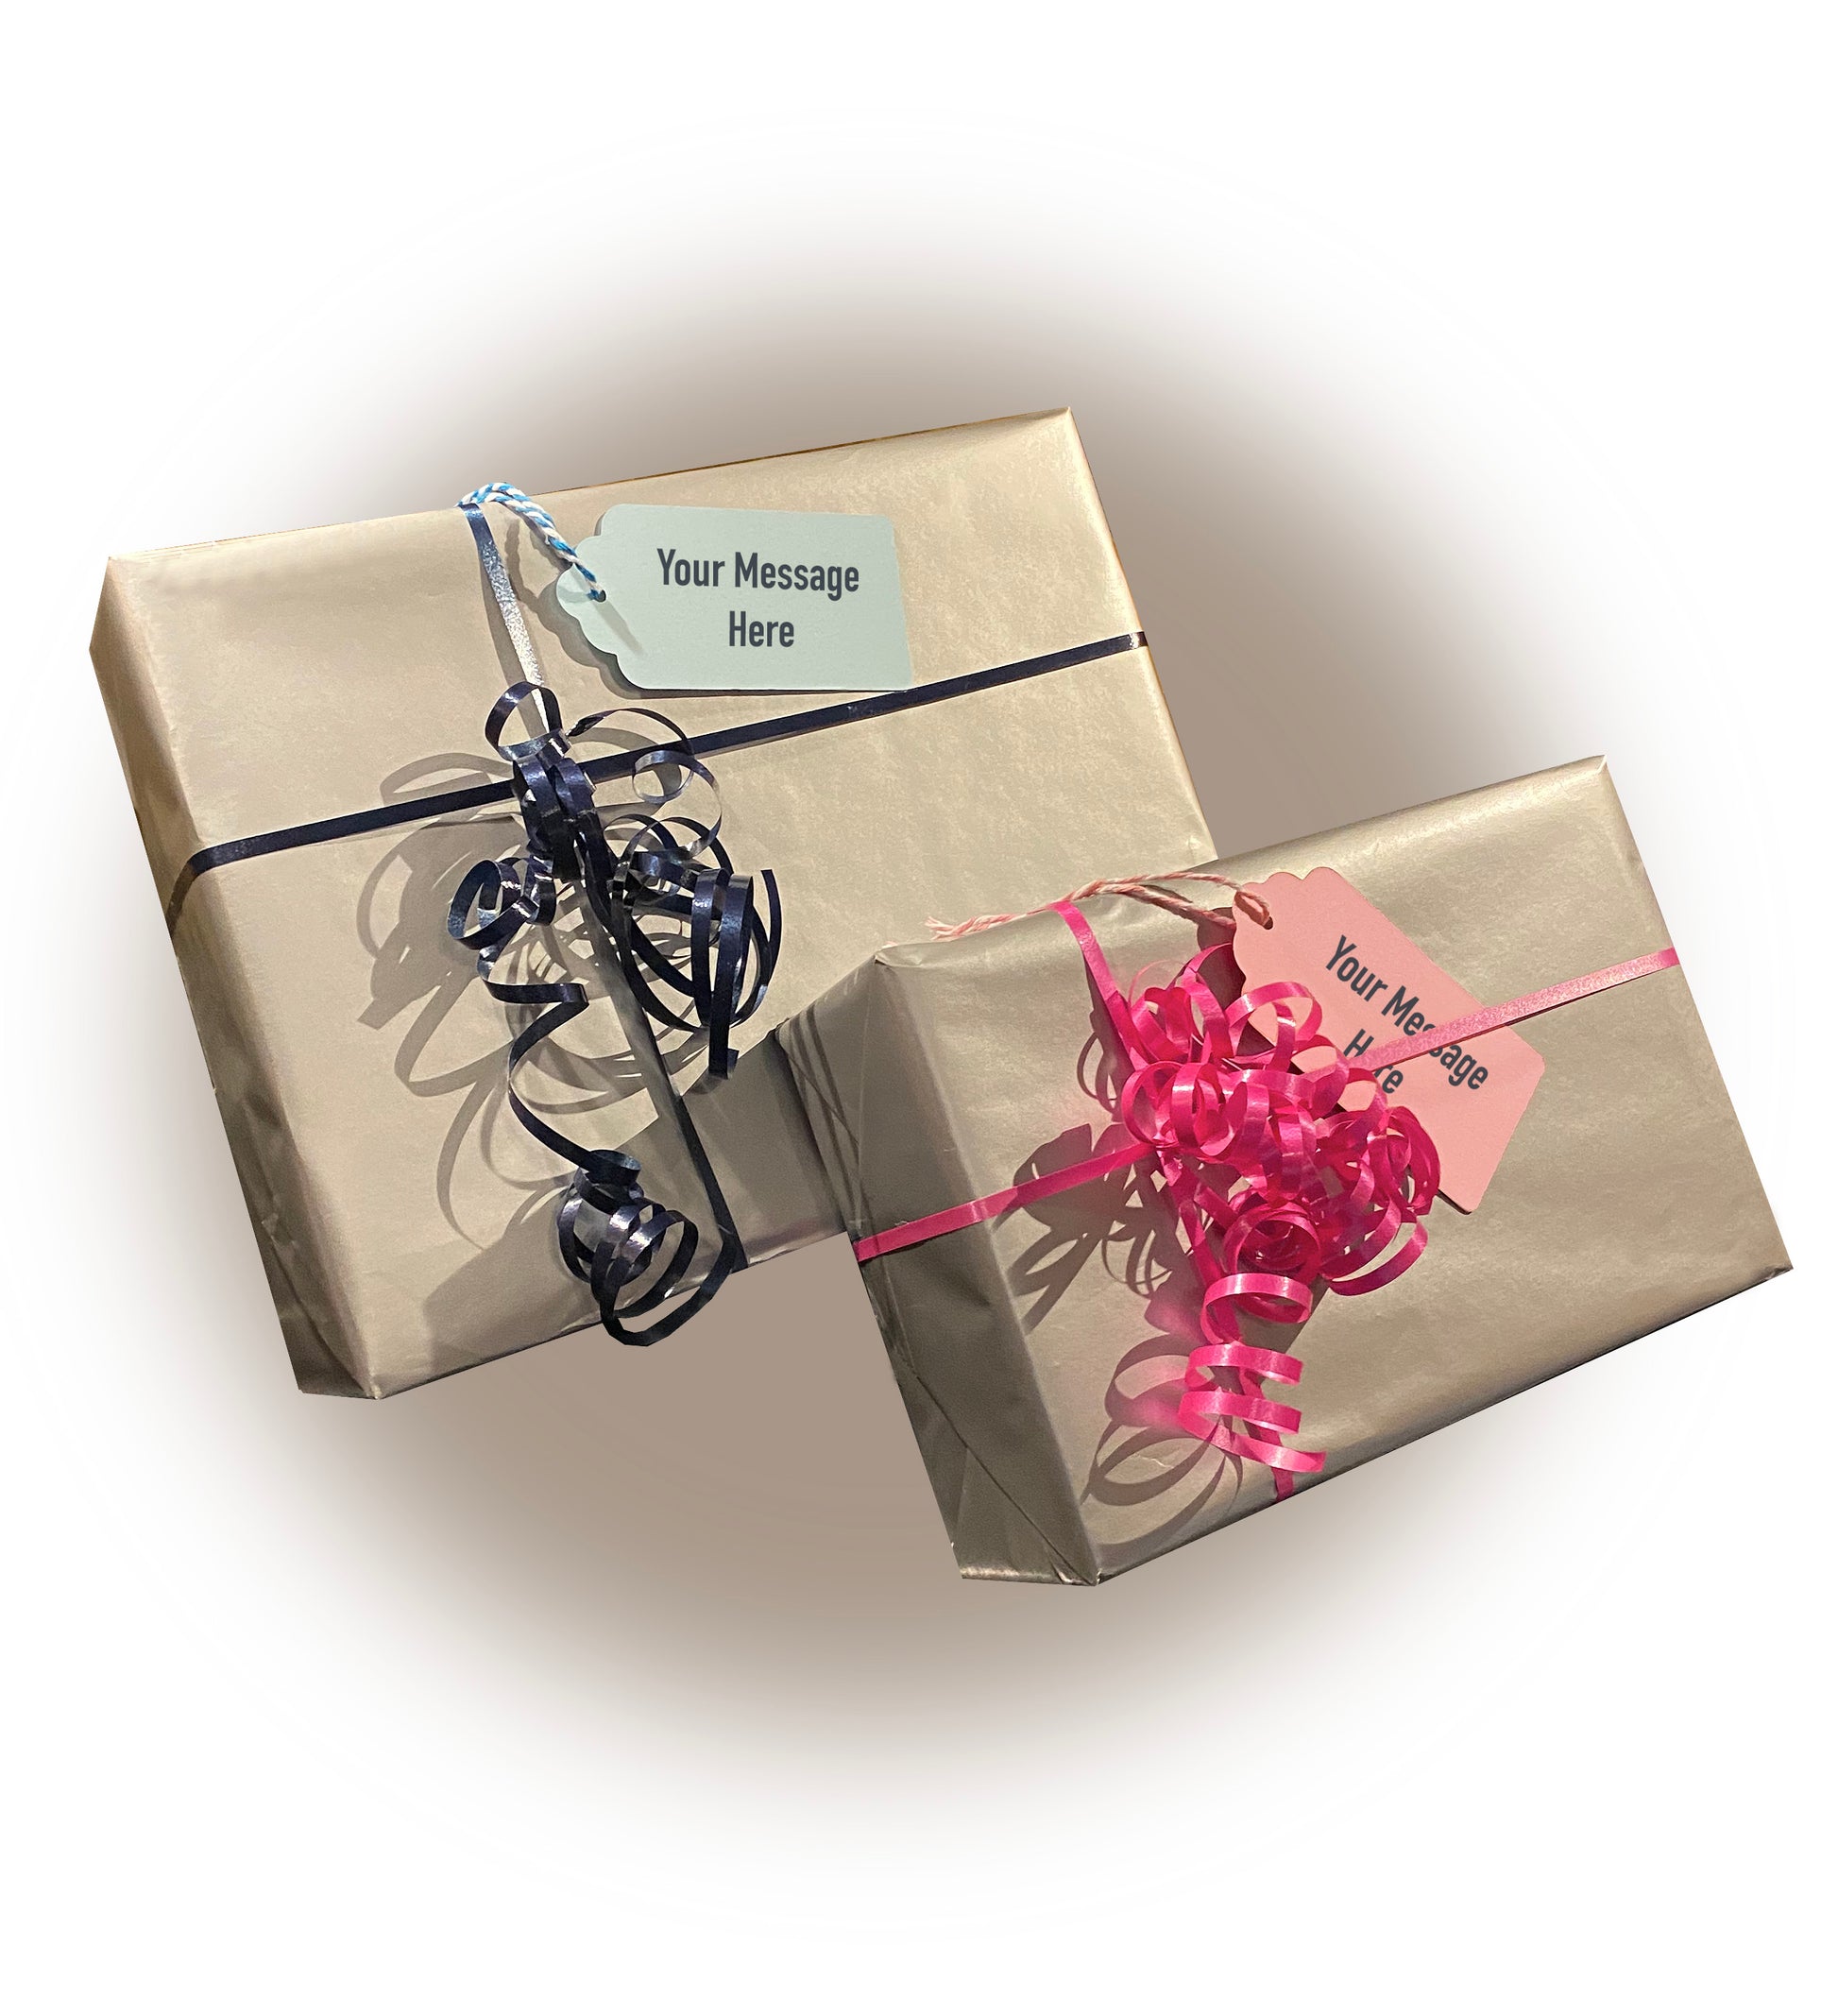 picture of delicate chomper variety box gift wrapped